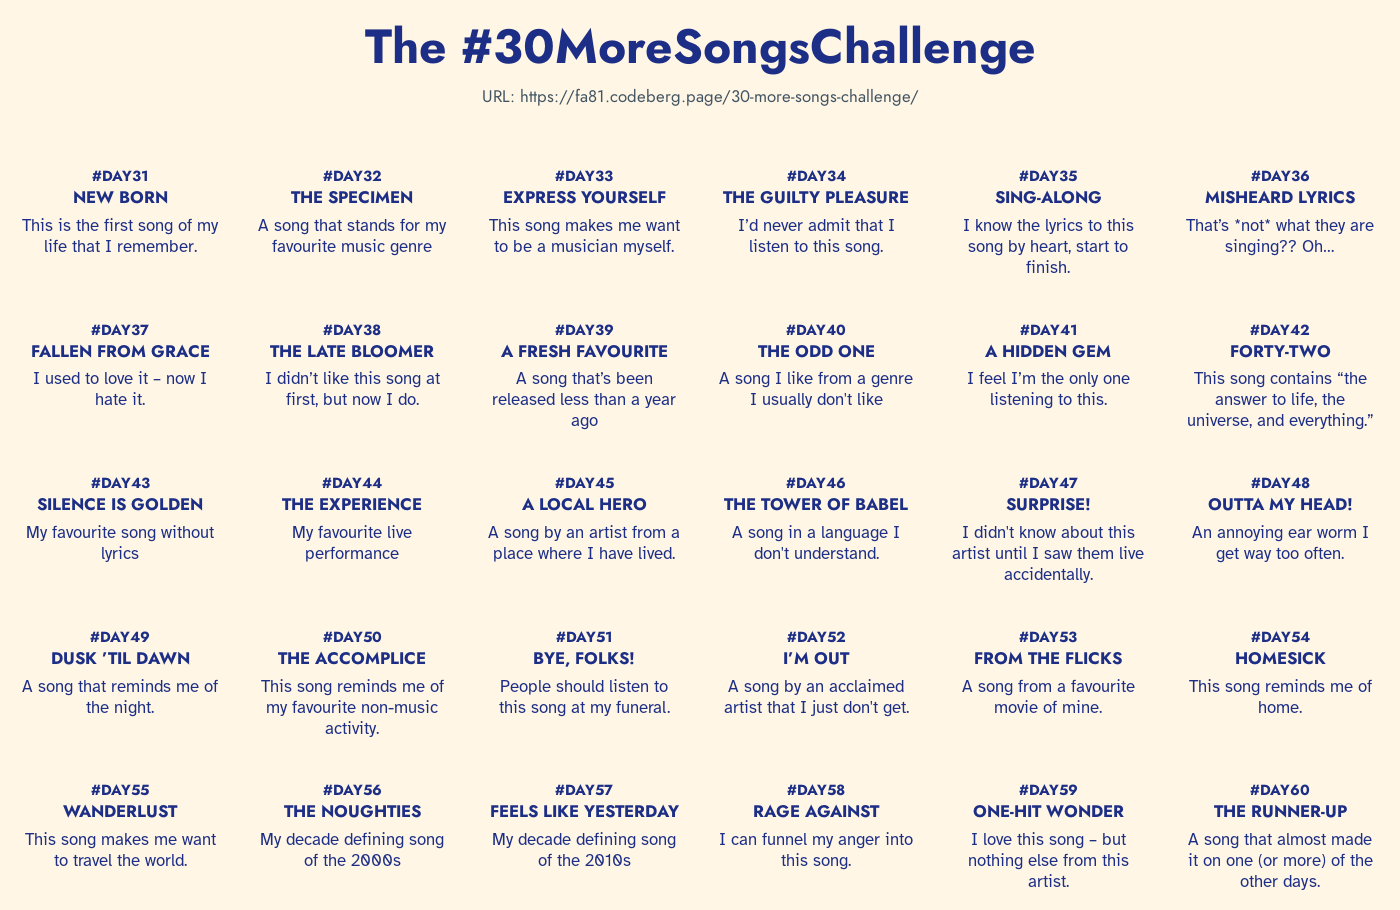 All 30 new challenges in a screenshot. Check the following URL (also mentioned in the post) for a text representation: https://fa81.codeberg.page/30-more-songs-challenge/